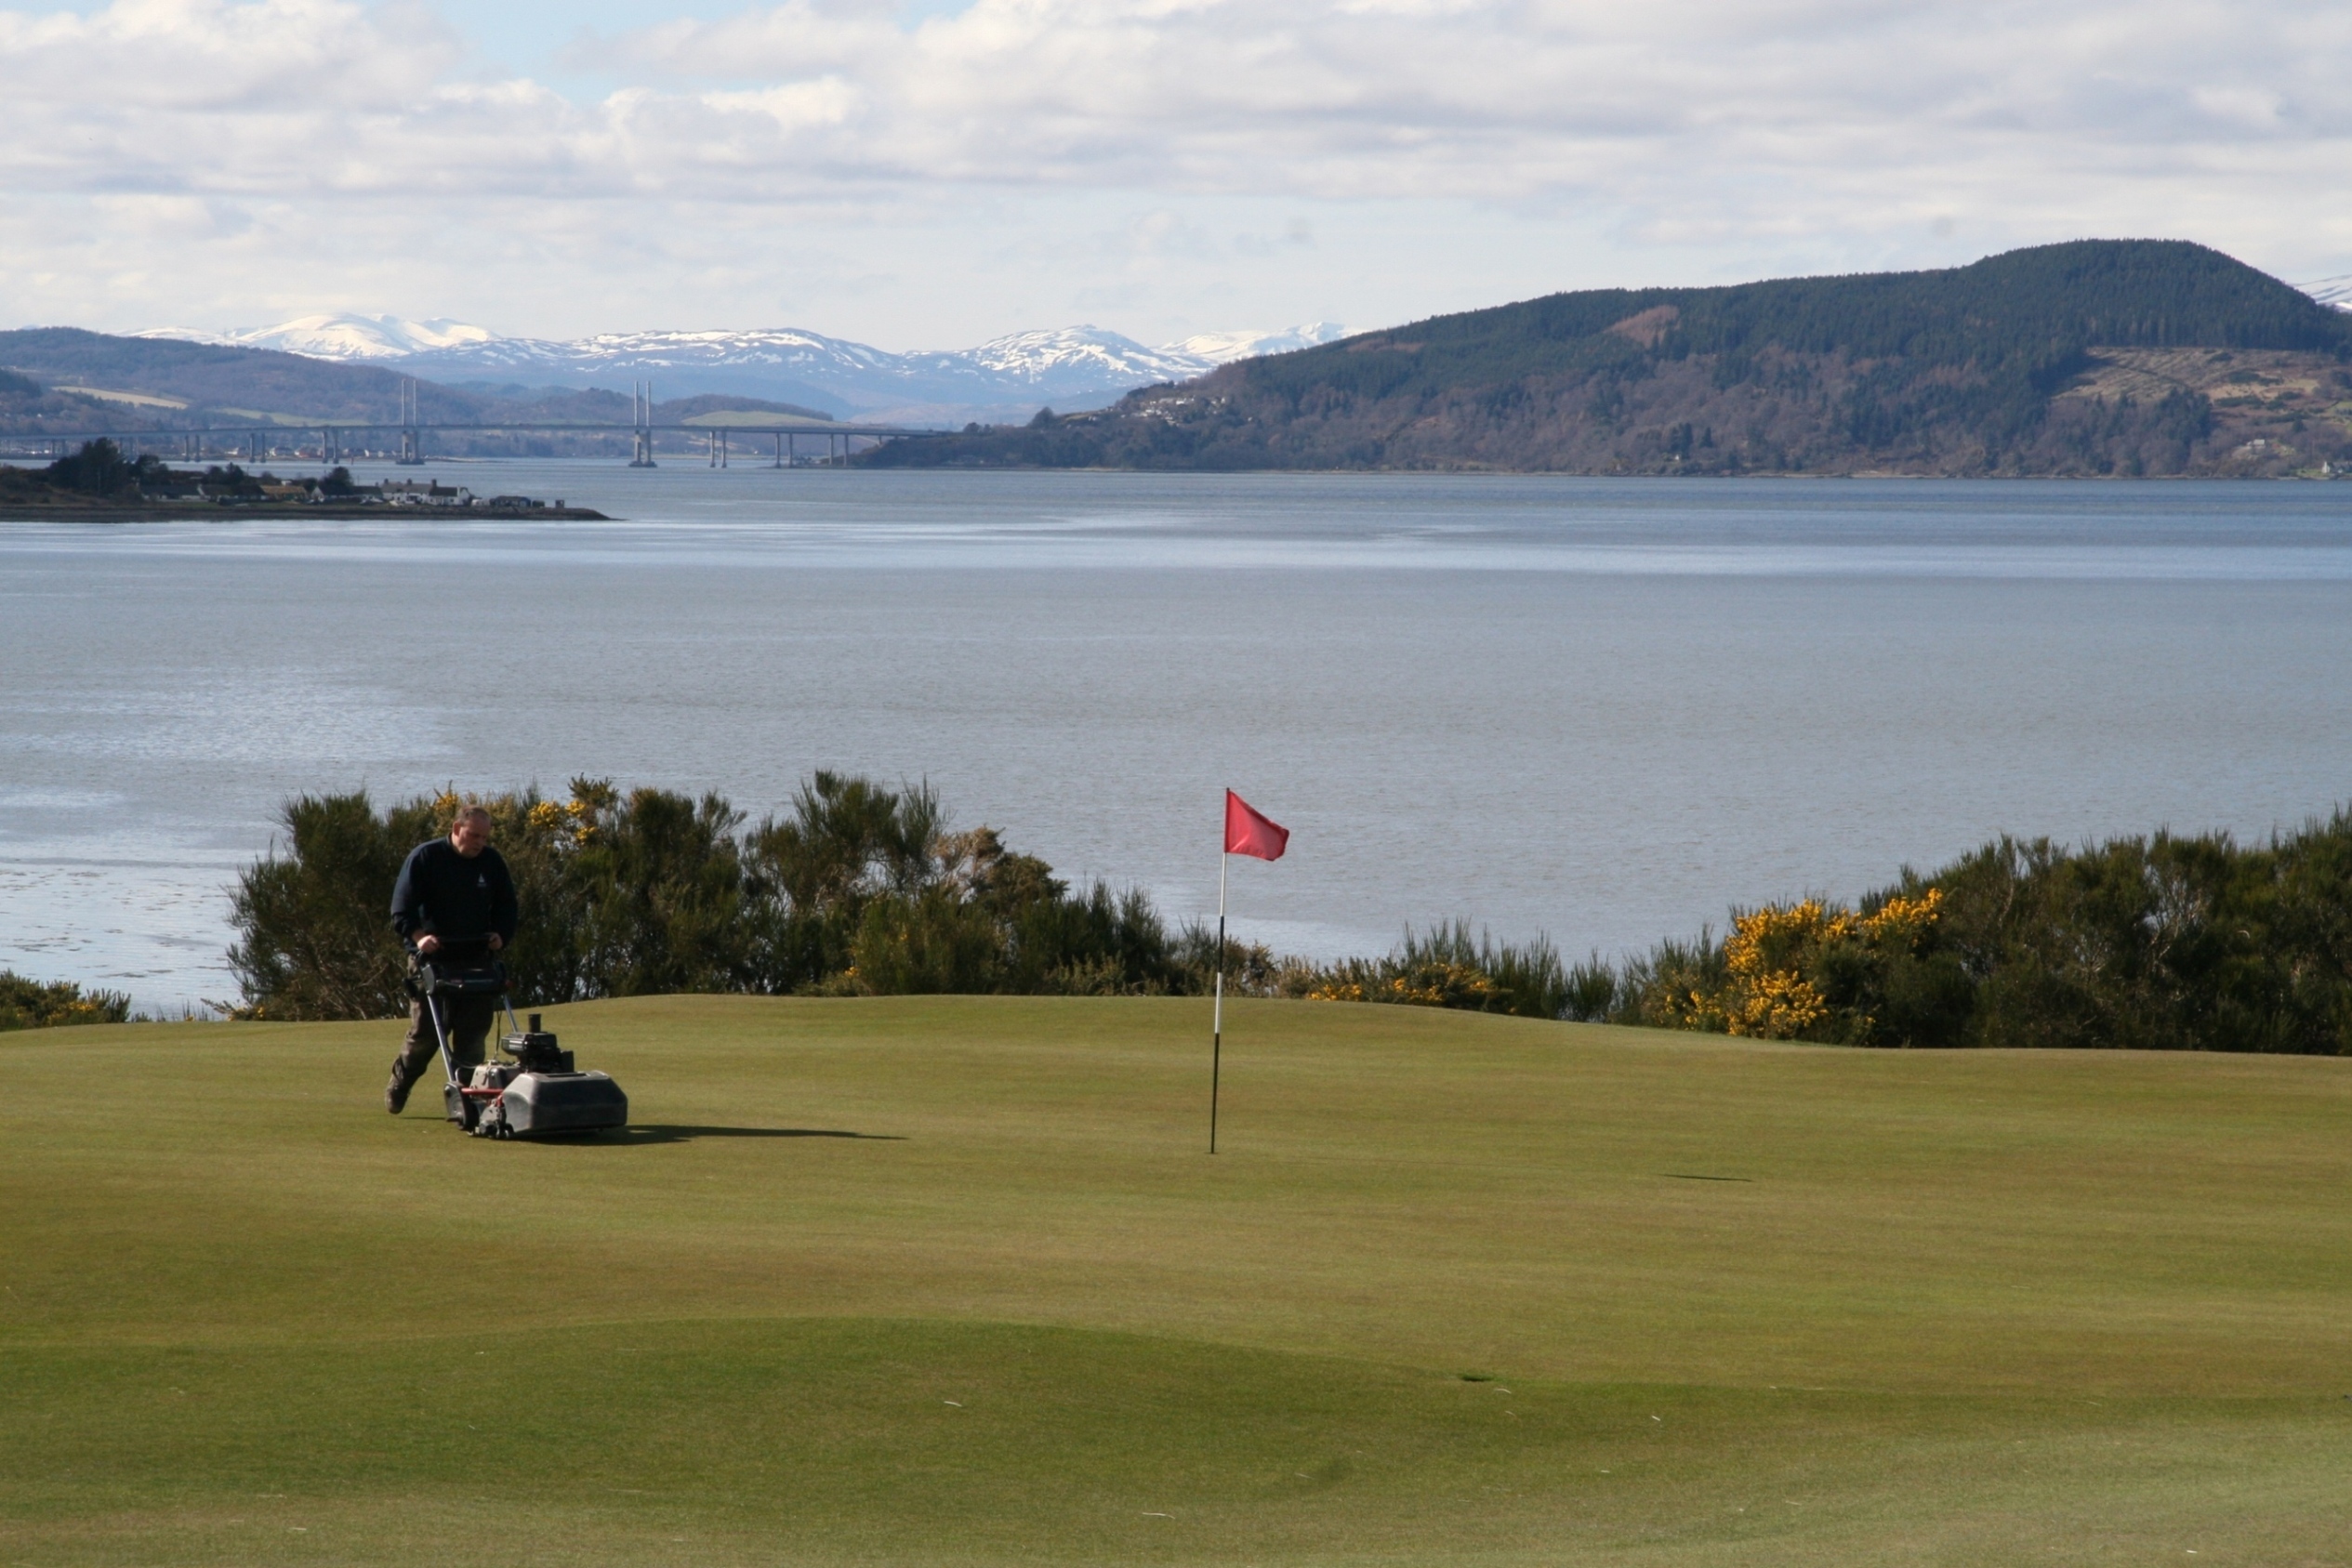 North golf courses like Castle Stuart hope to welcome a host of new players from China.